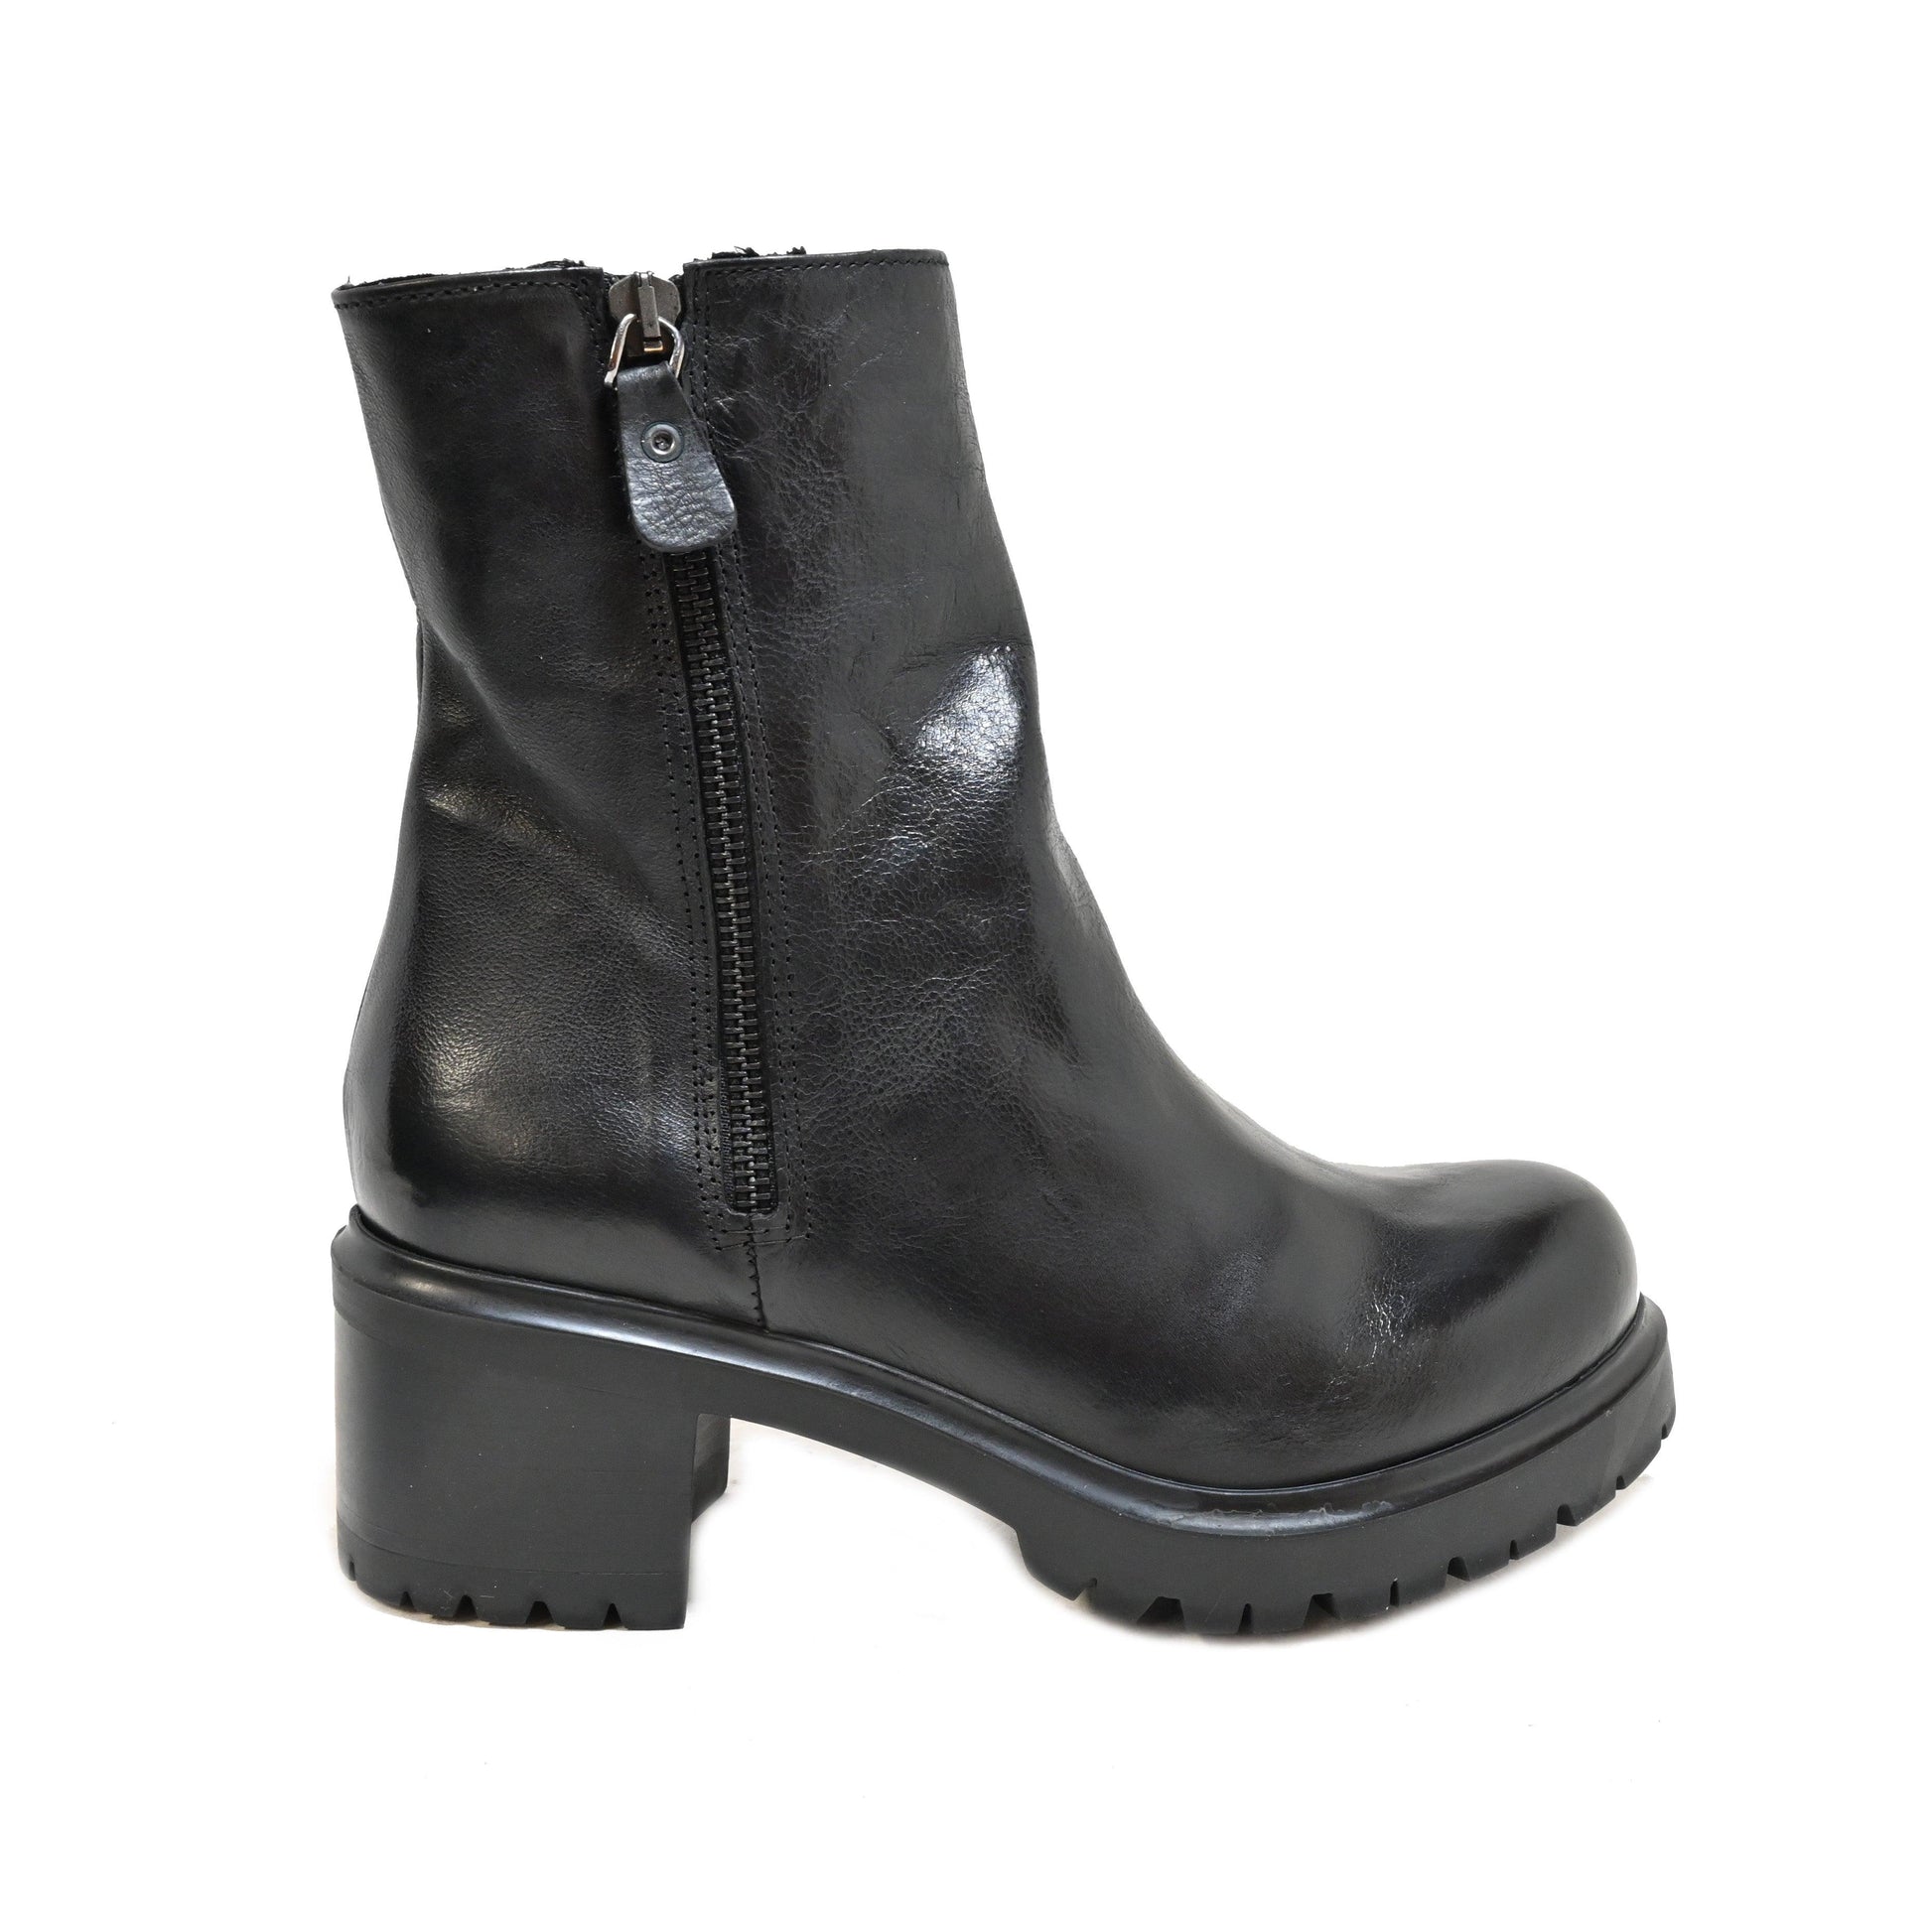 LINDA 04 - Ankle boot leather BLACK - History541